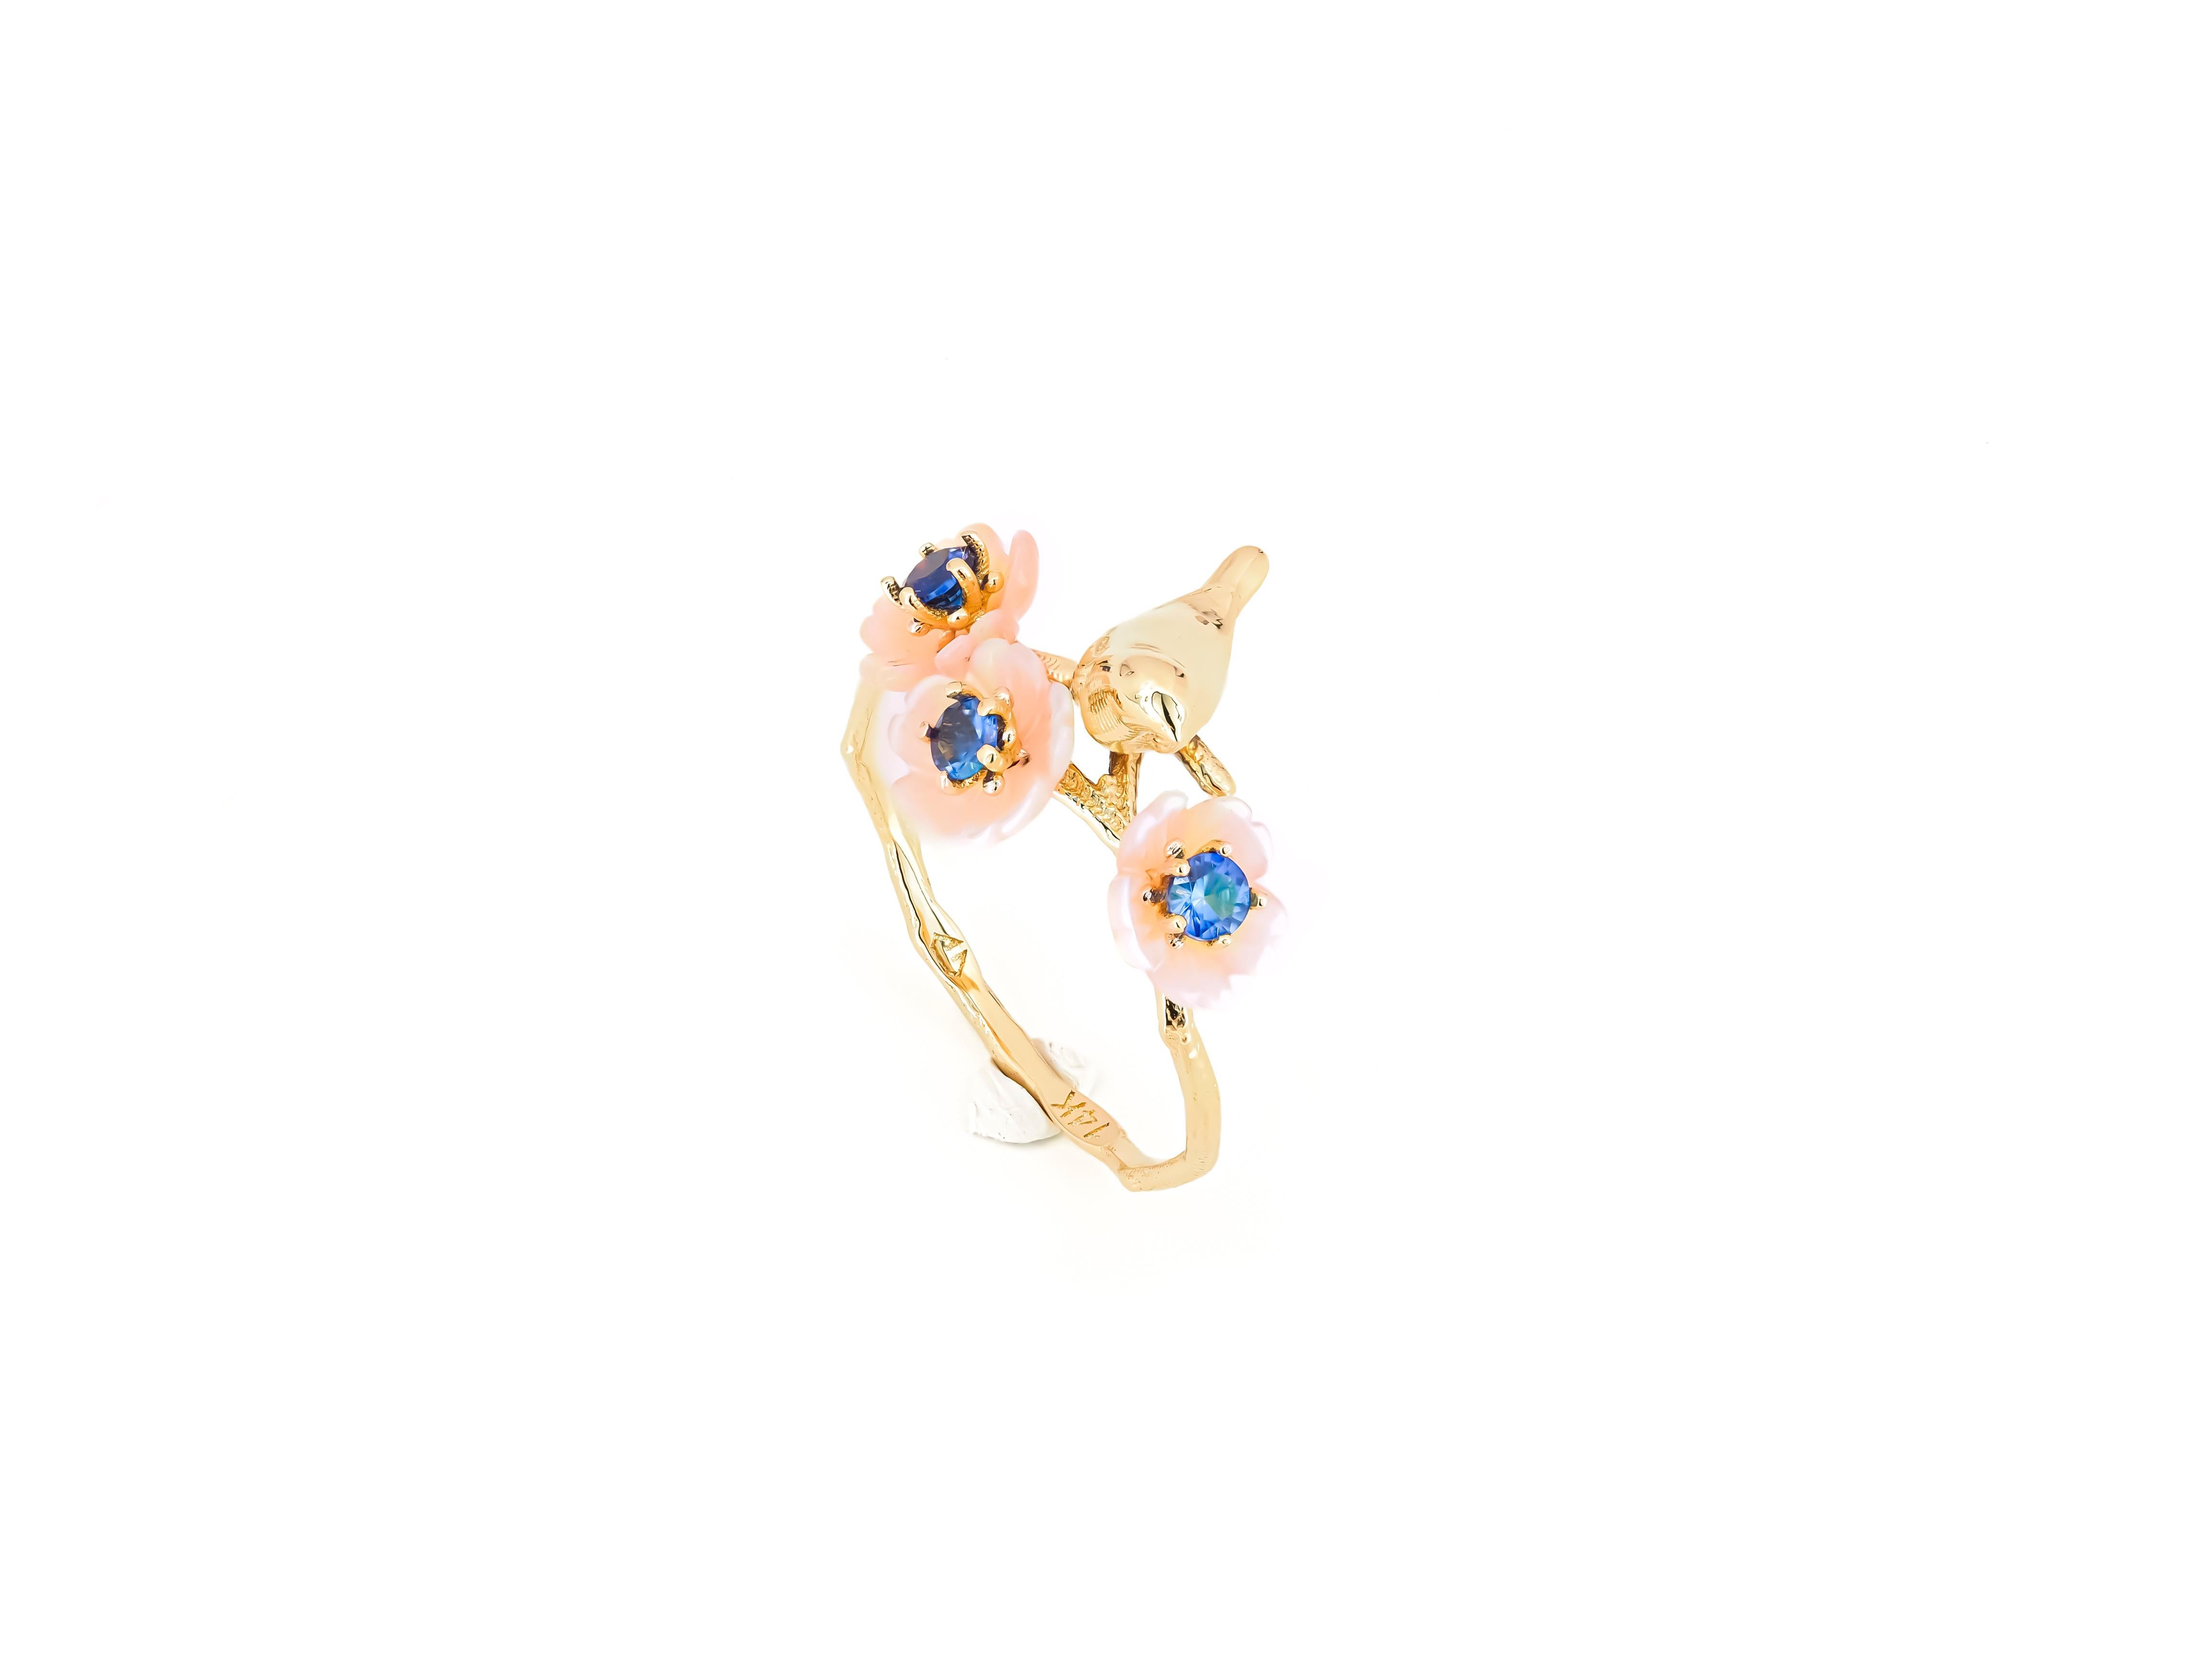 For Sale:  14k Gold Bird on Branch Ring. Sapphires and Carved Mother of Pearl ring! 9